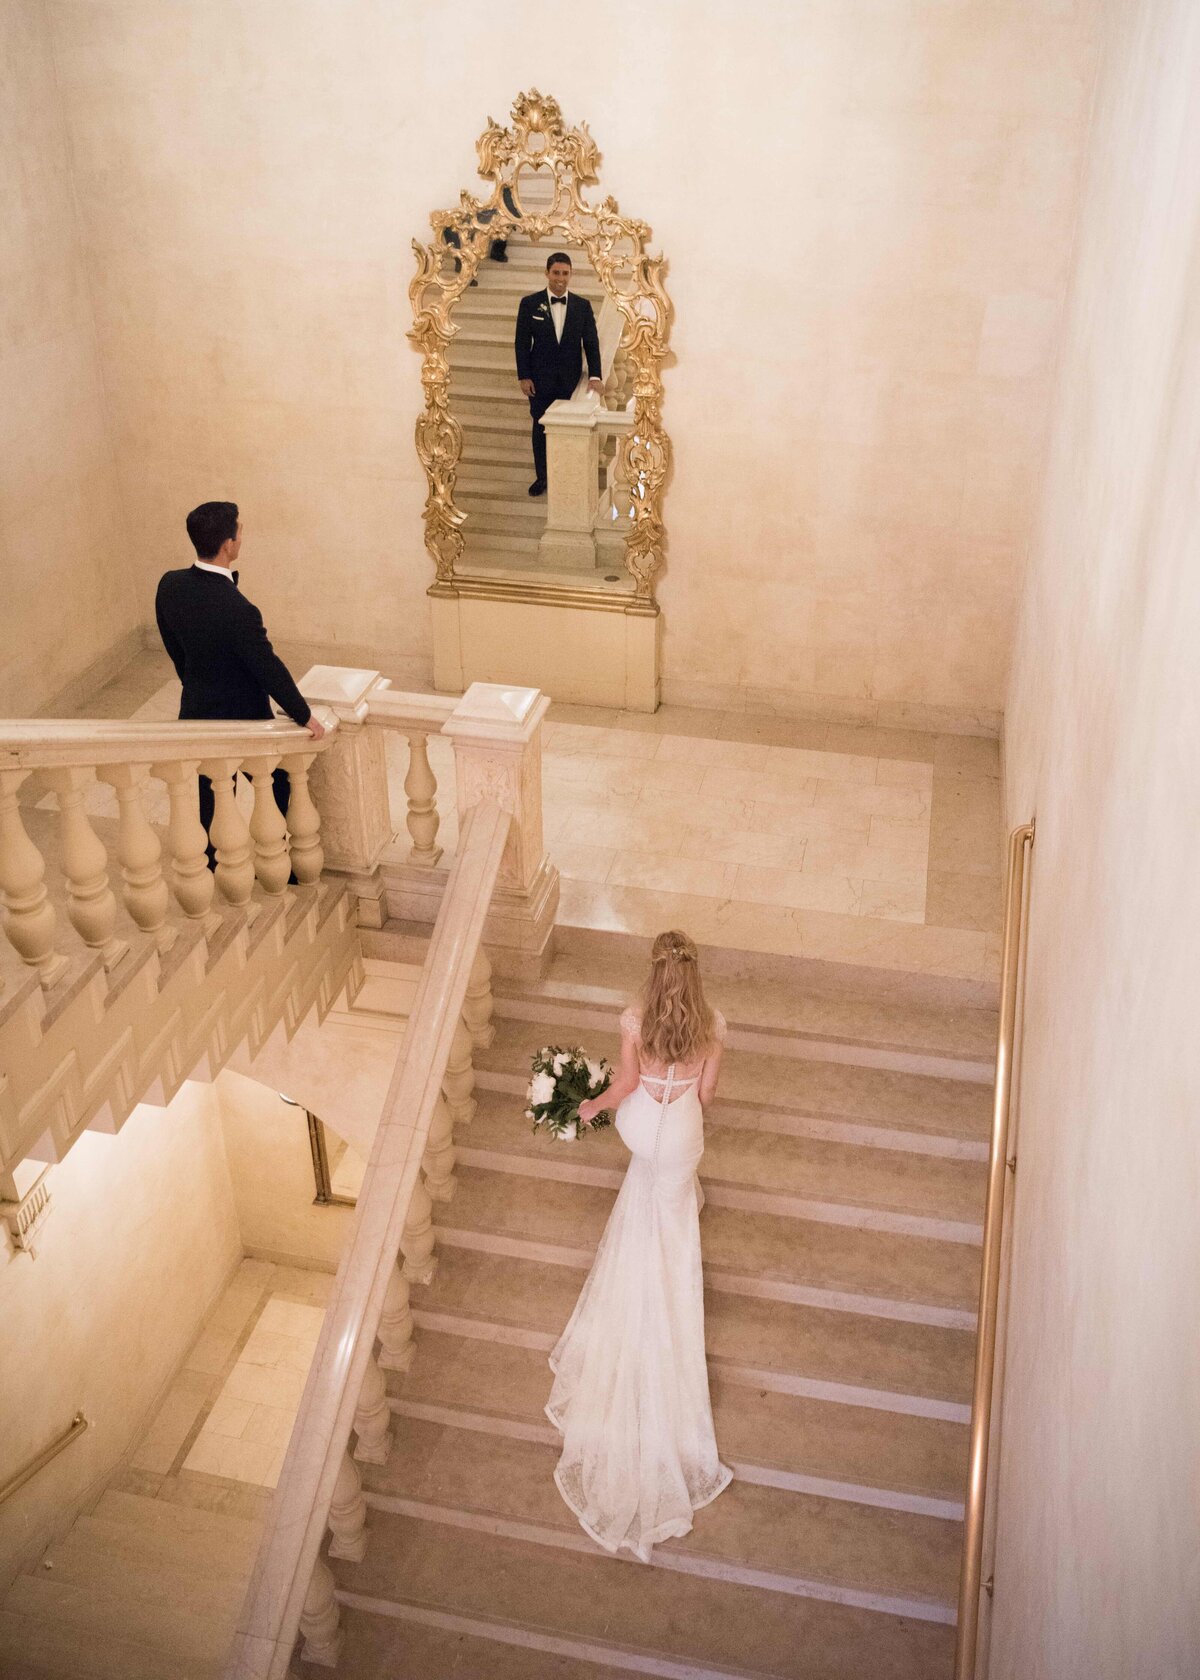 bride and groom first look by staircase